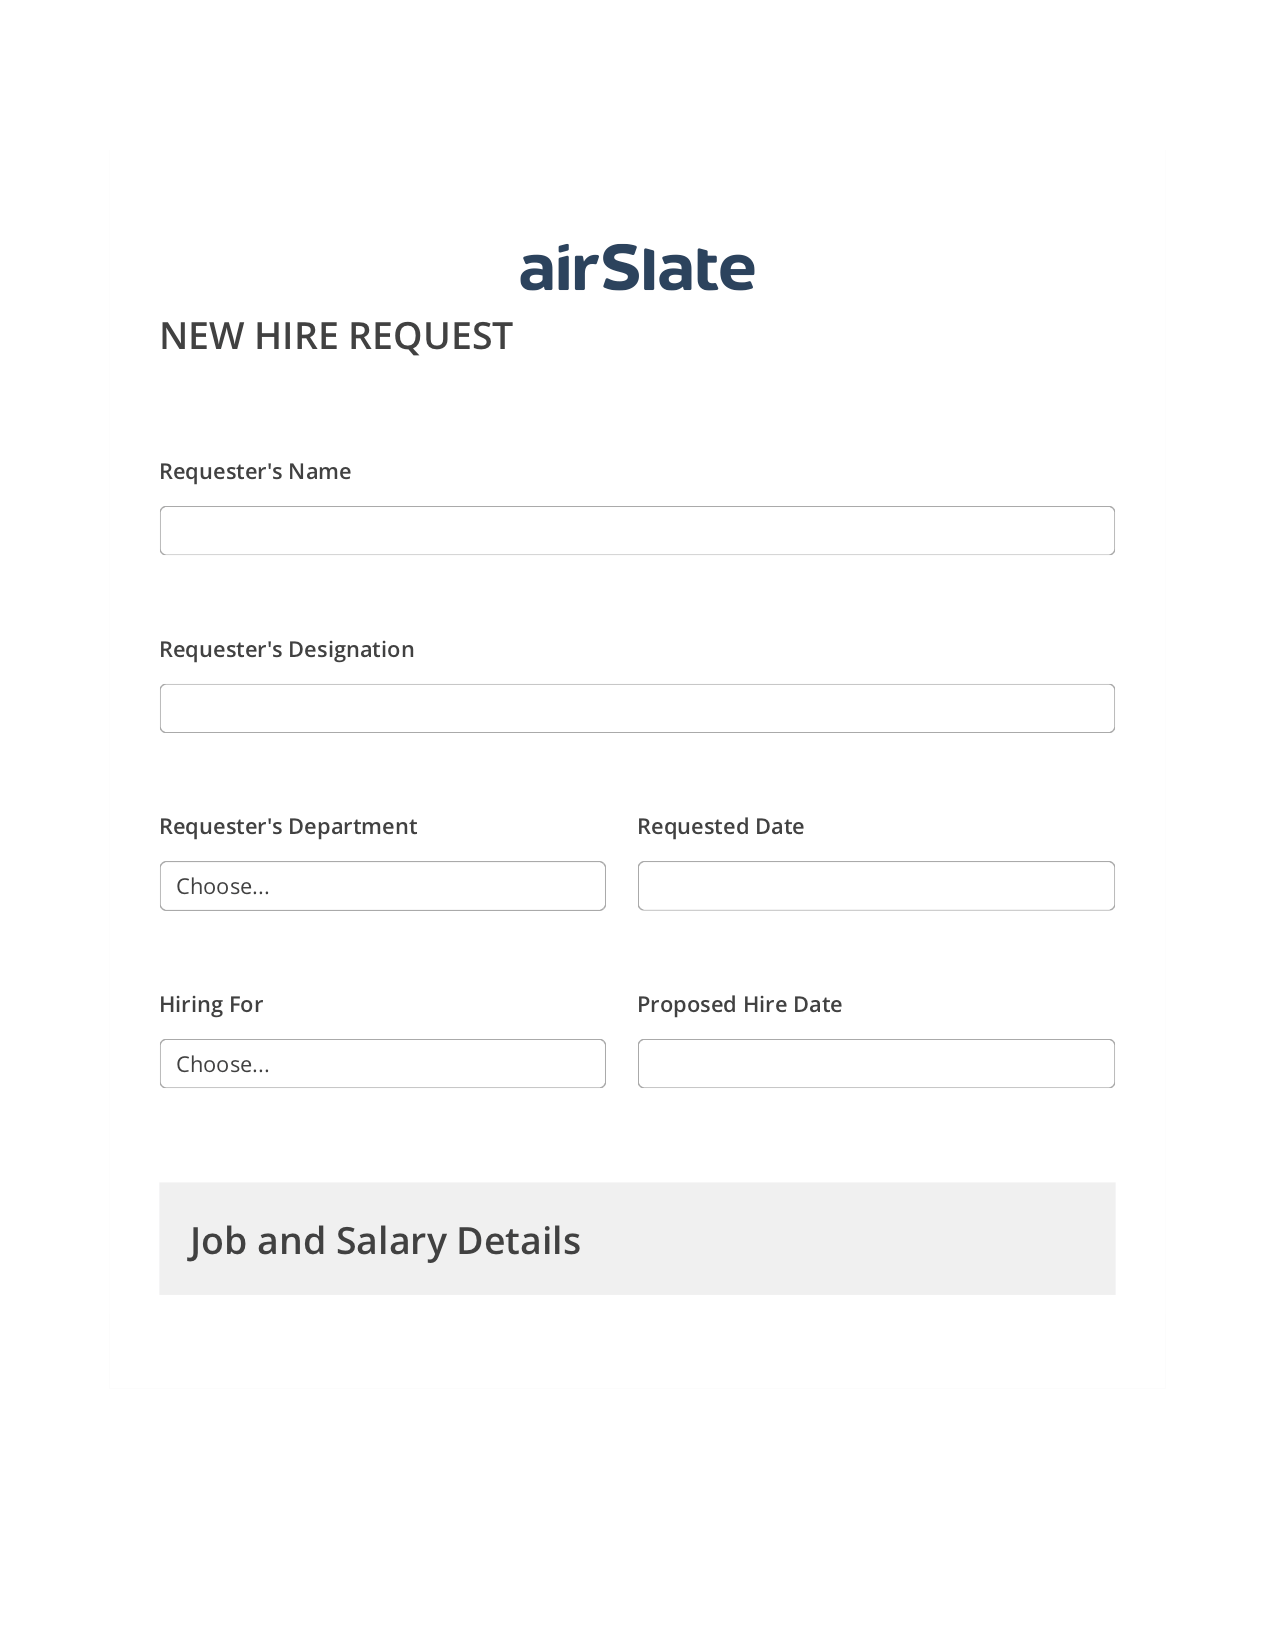 Hiring Request Workflow Pre-fill Dropdowns from Excel Bot, Send Mailchimp Campaign Bot, Post-finish Document Bot